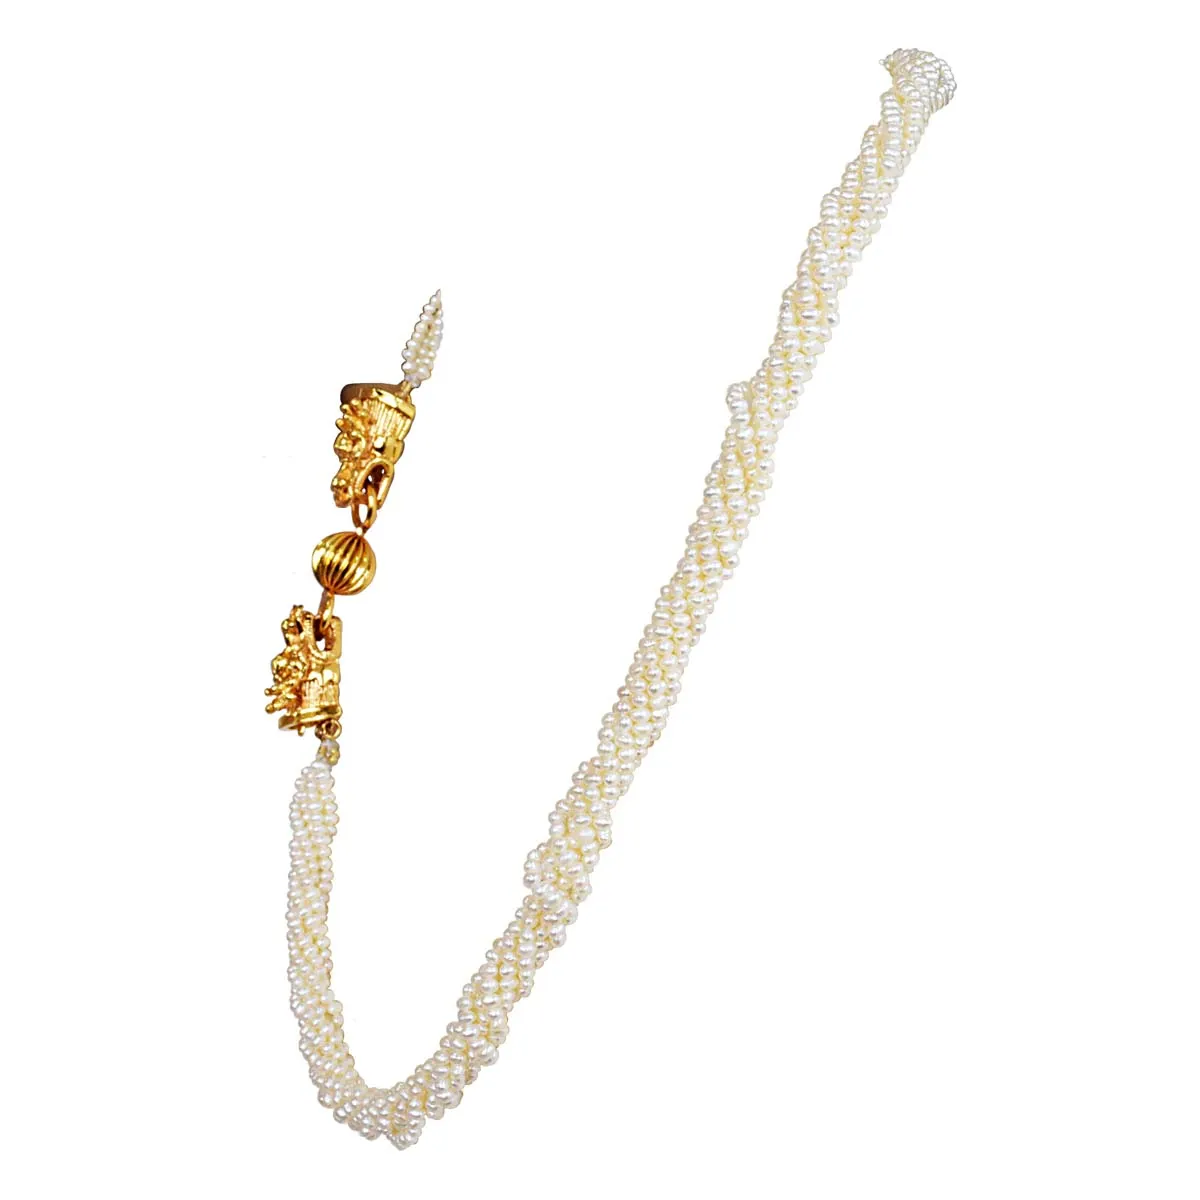 6 Line Twisted Real Freshwater Pearl & Fancy Gold Plated Clasp Necklace for Women (SN1049)